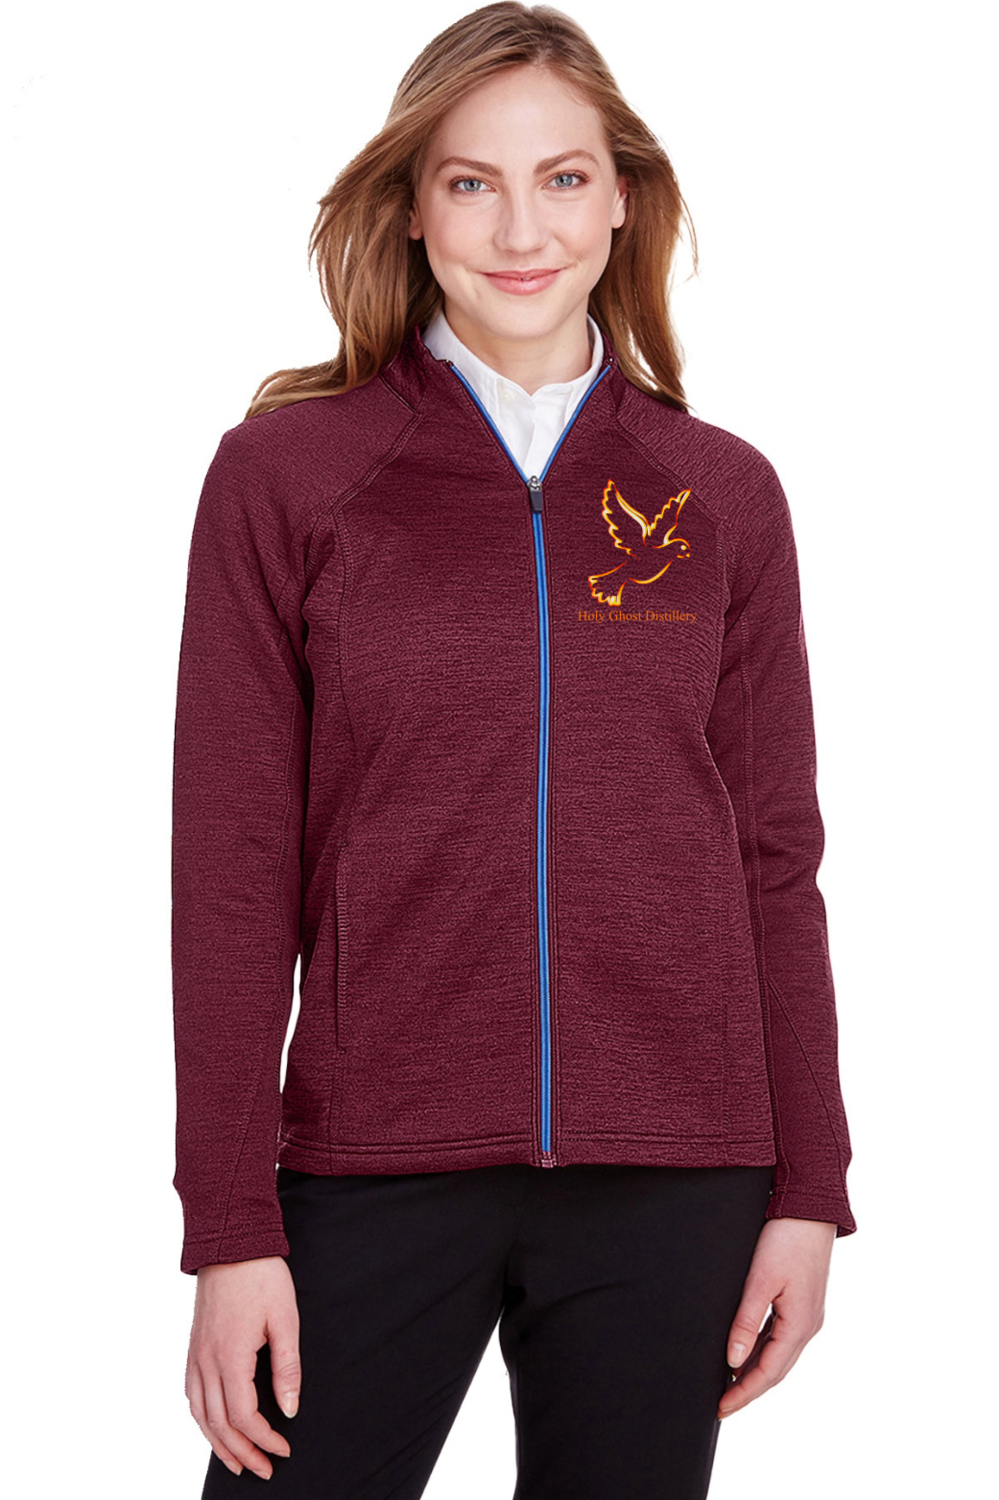 Women's Embroidered Full-Zip Jacket - SIZE Small